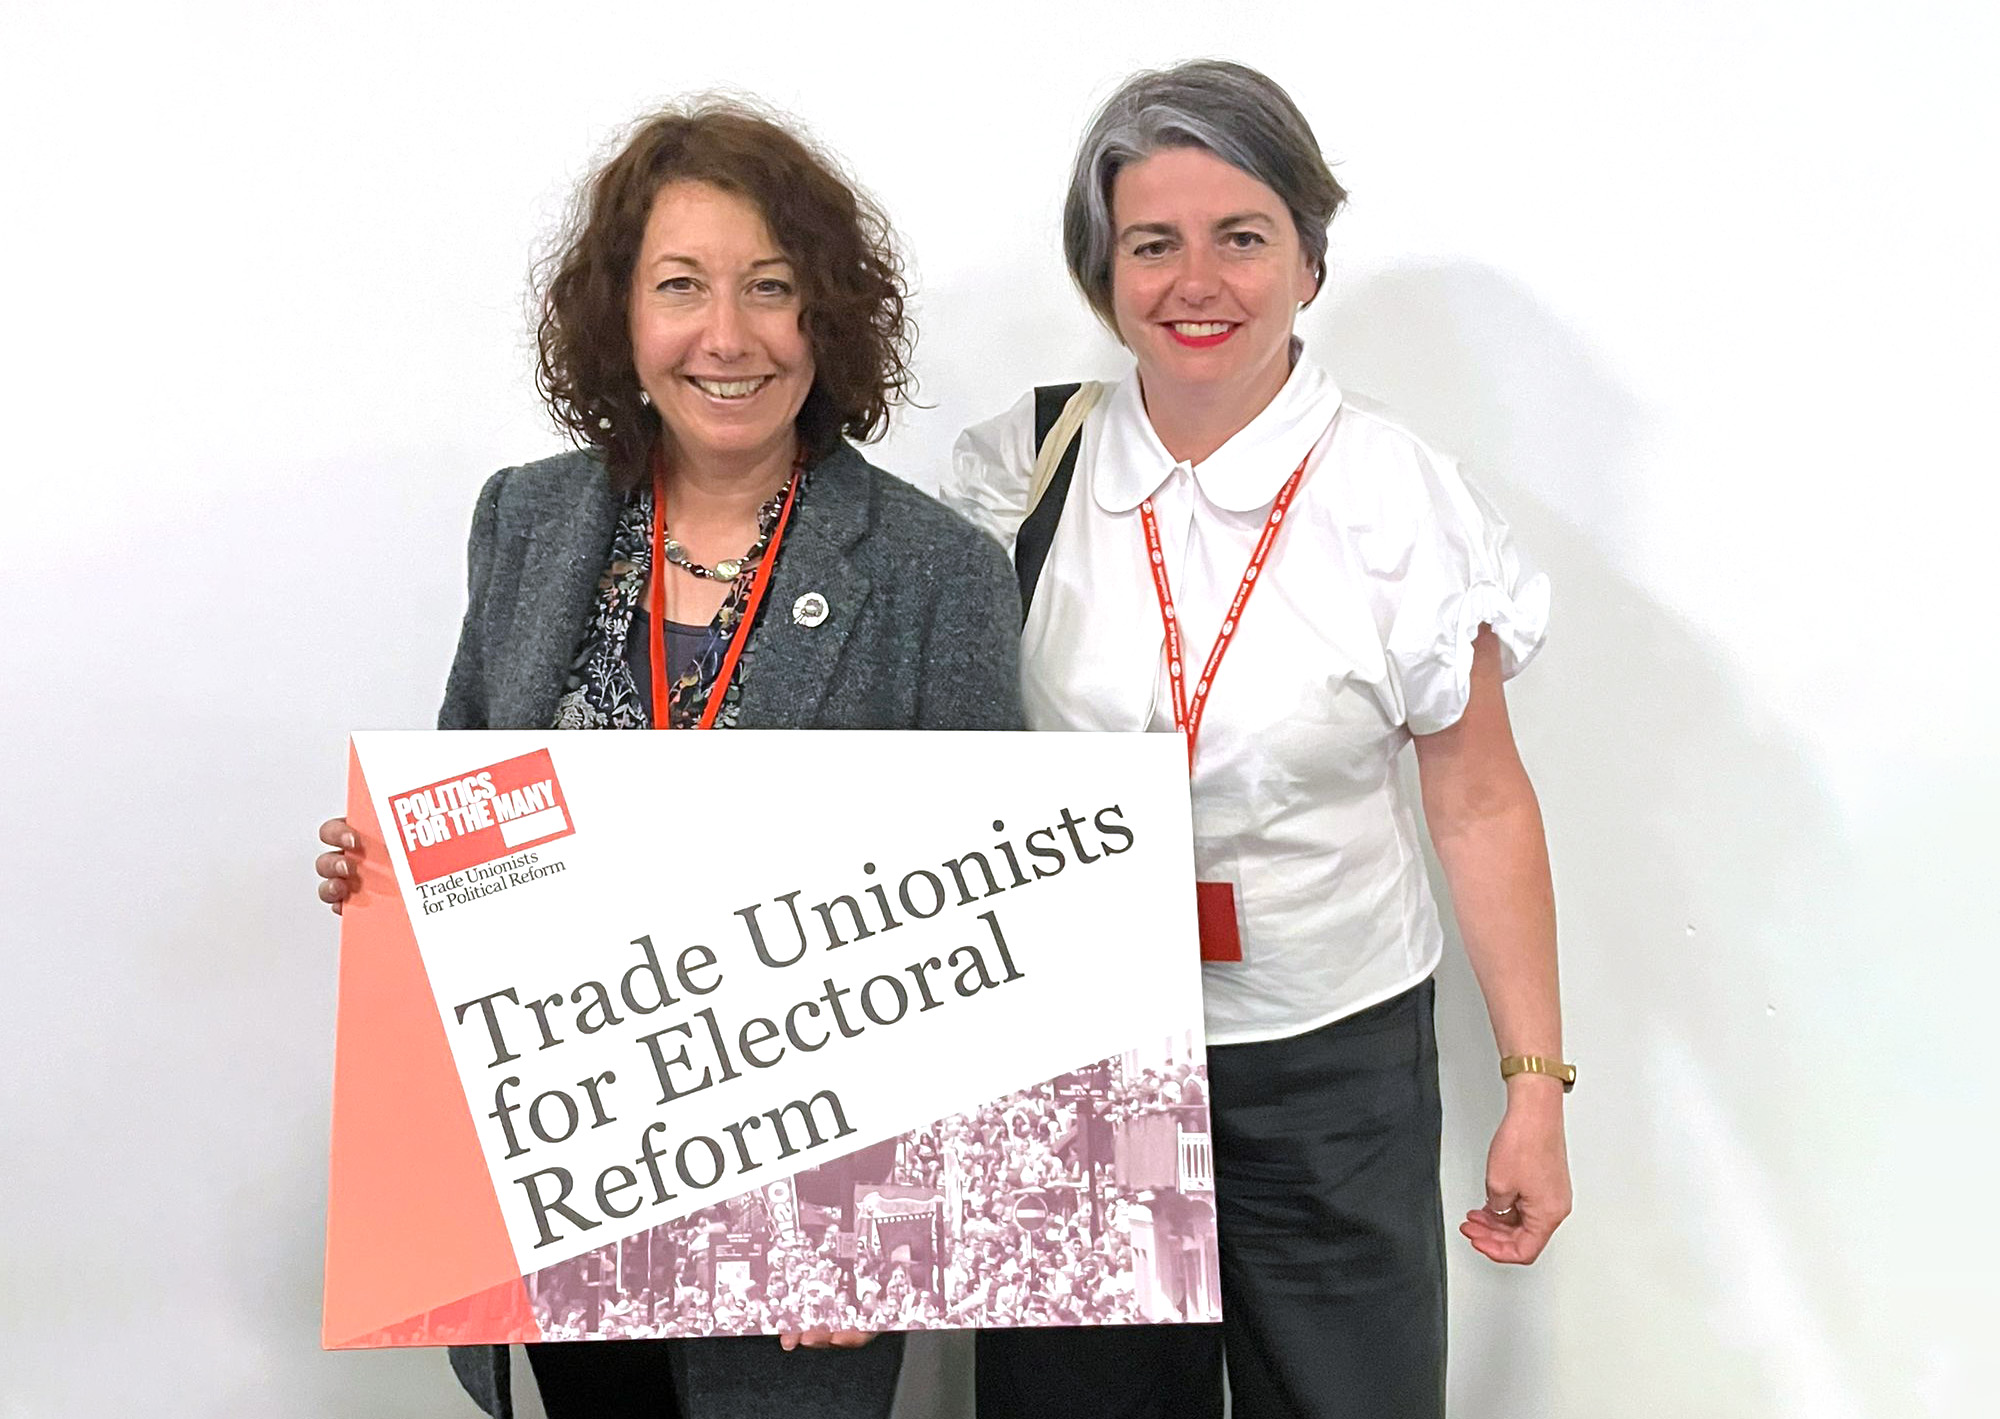 Trade Unionists for Electoral Reform